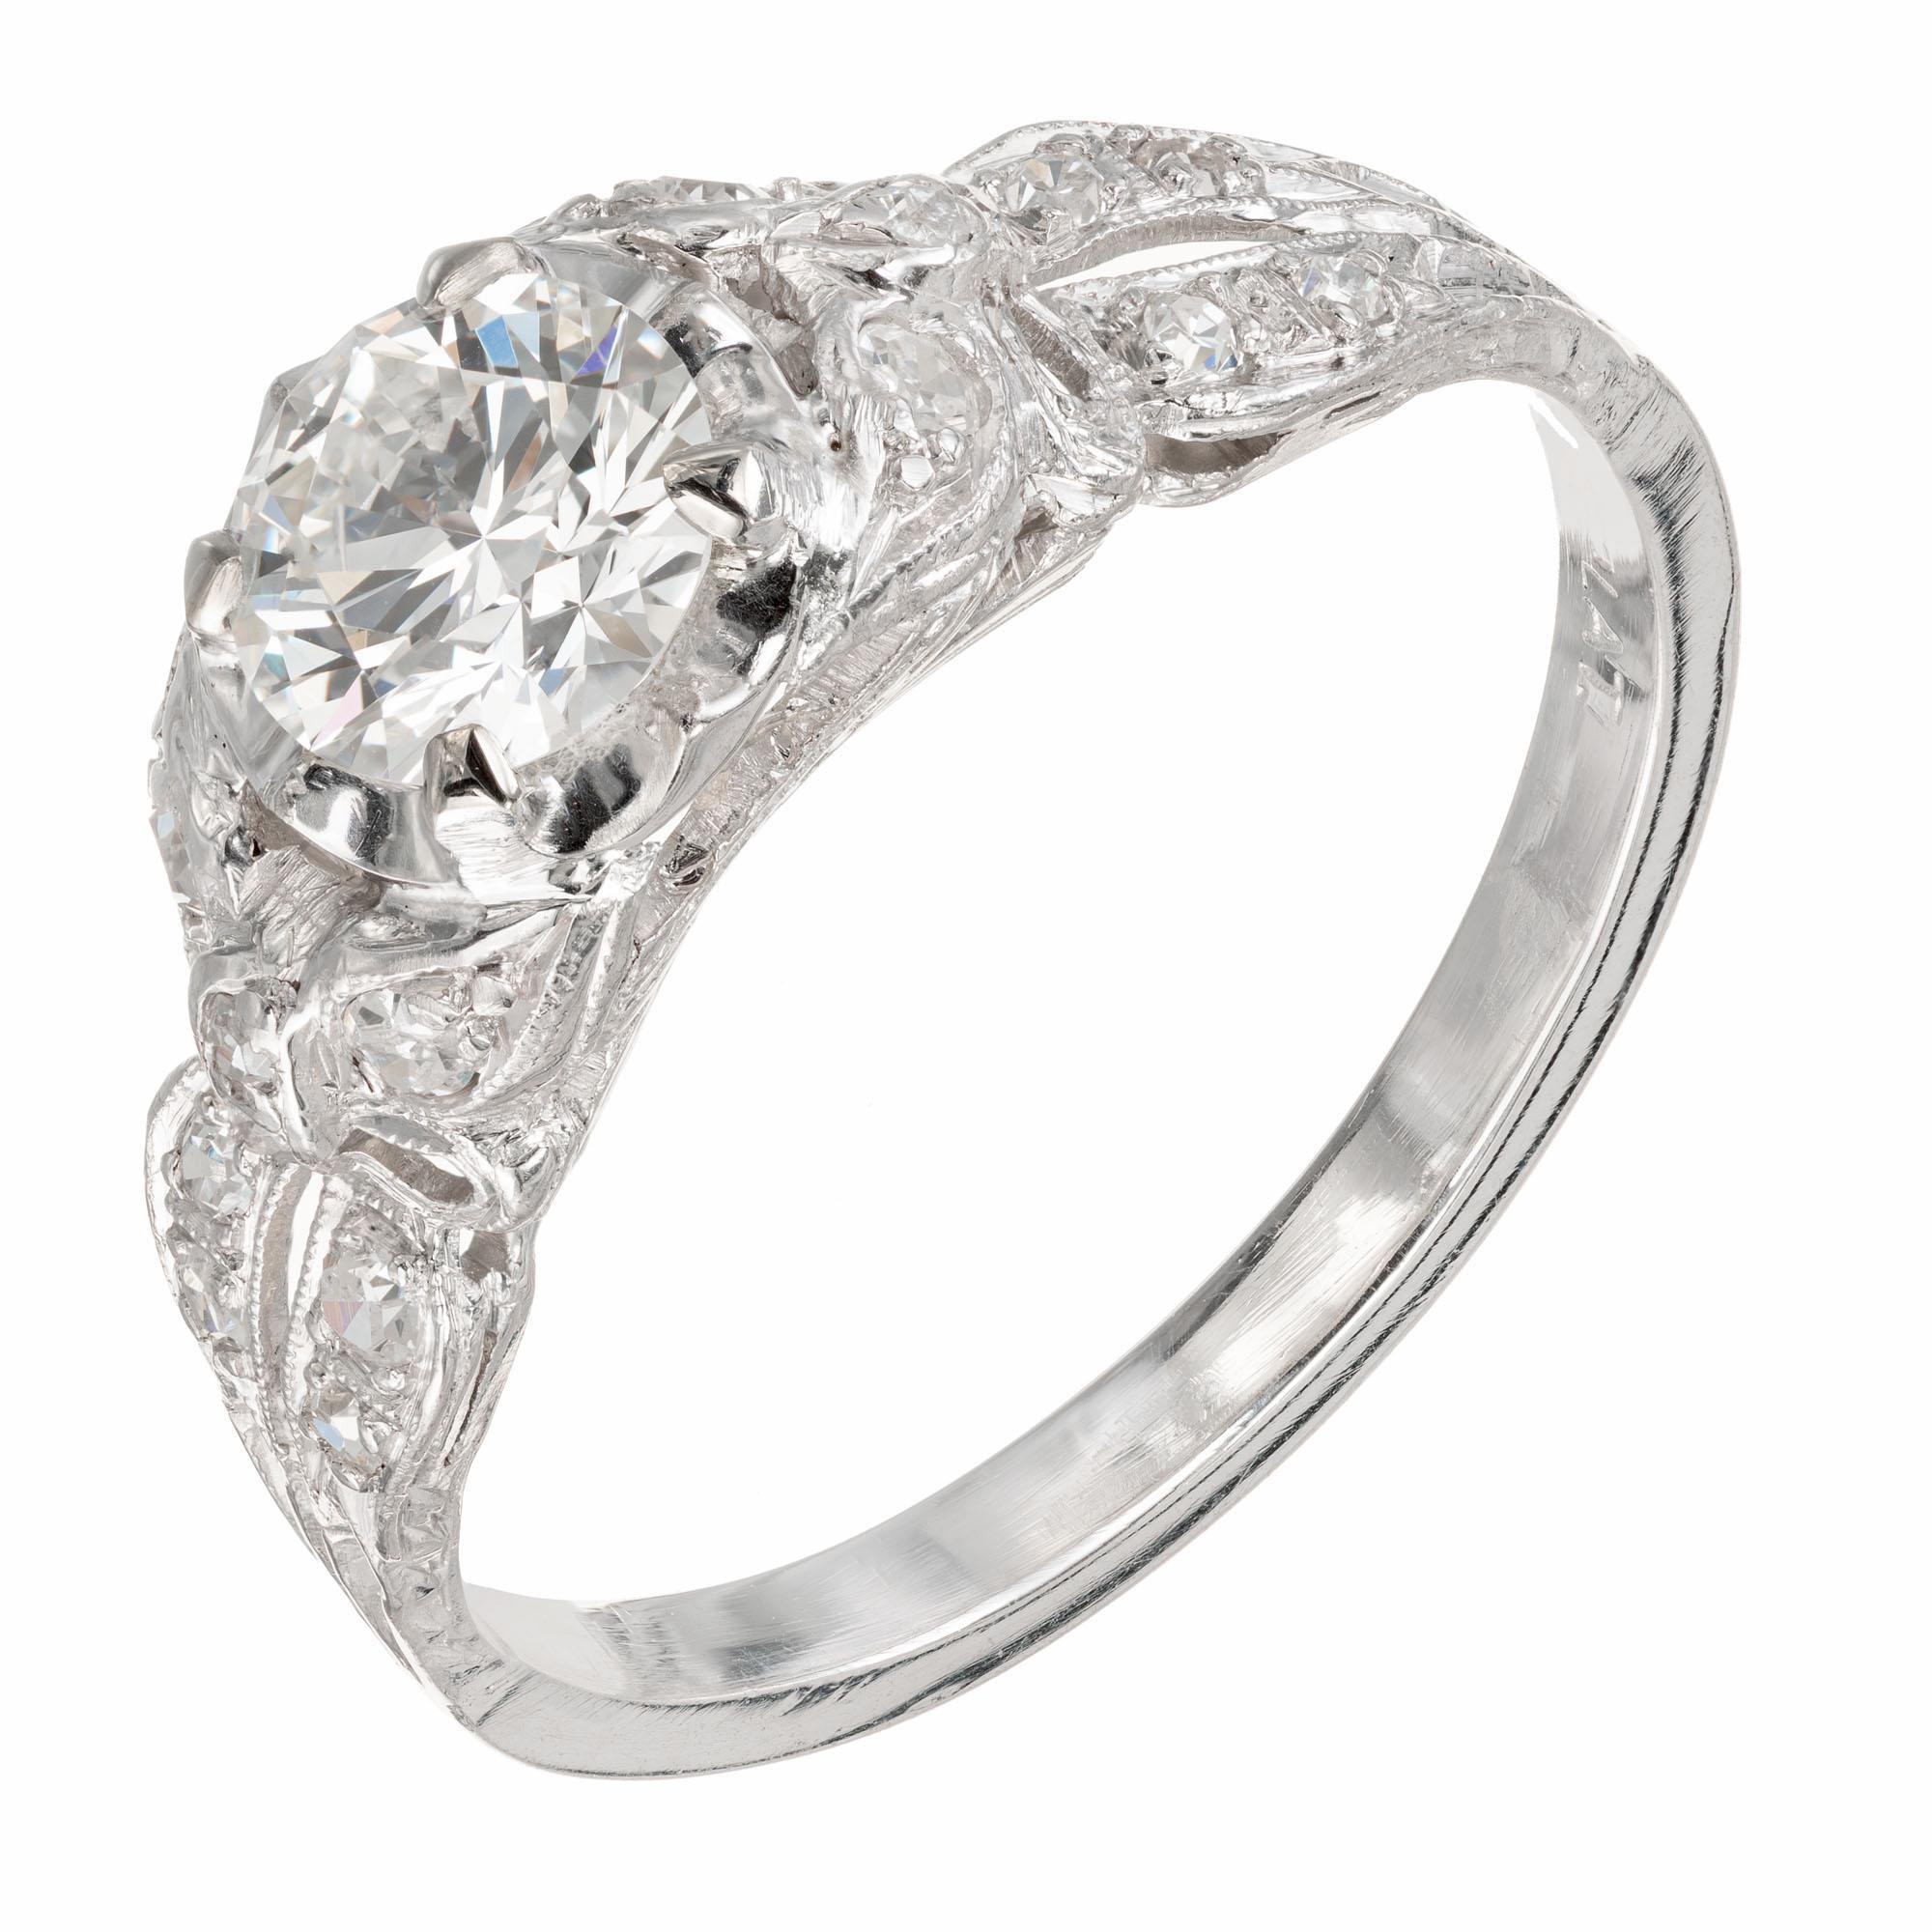 Art Deco platinum 1930's diamond engagement ring. Pierced engraved and pave set with a butterfly or bow design on each shoulder accented with 16 single cut brilliant diamonds. EGL certified 

1 round brilliant cut diamond, approx. .77cts H-I VS EGL